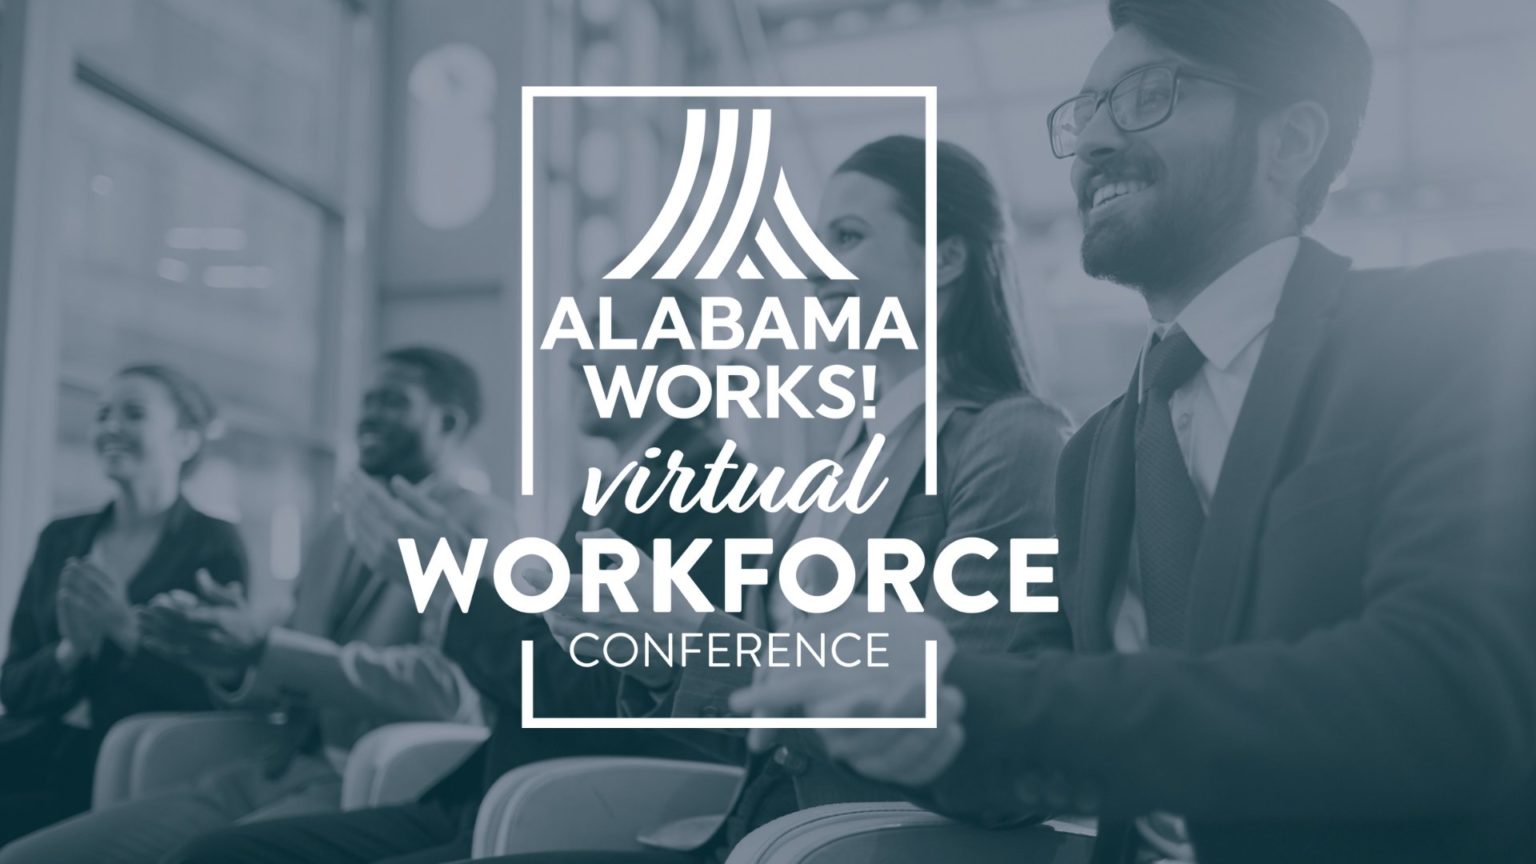 AlabamaWorks to host virtual conference addressing issues concerning